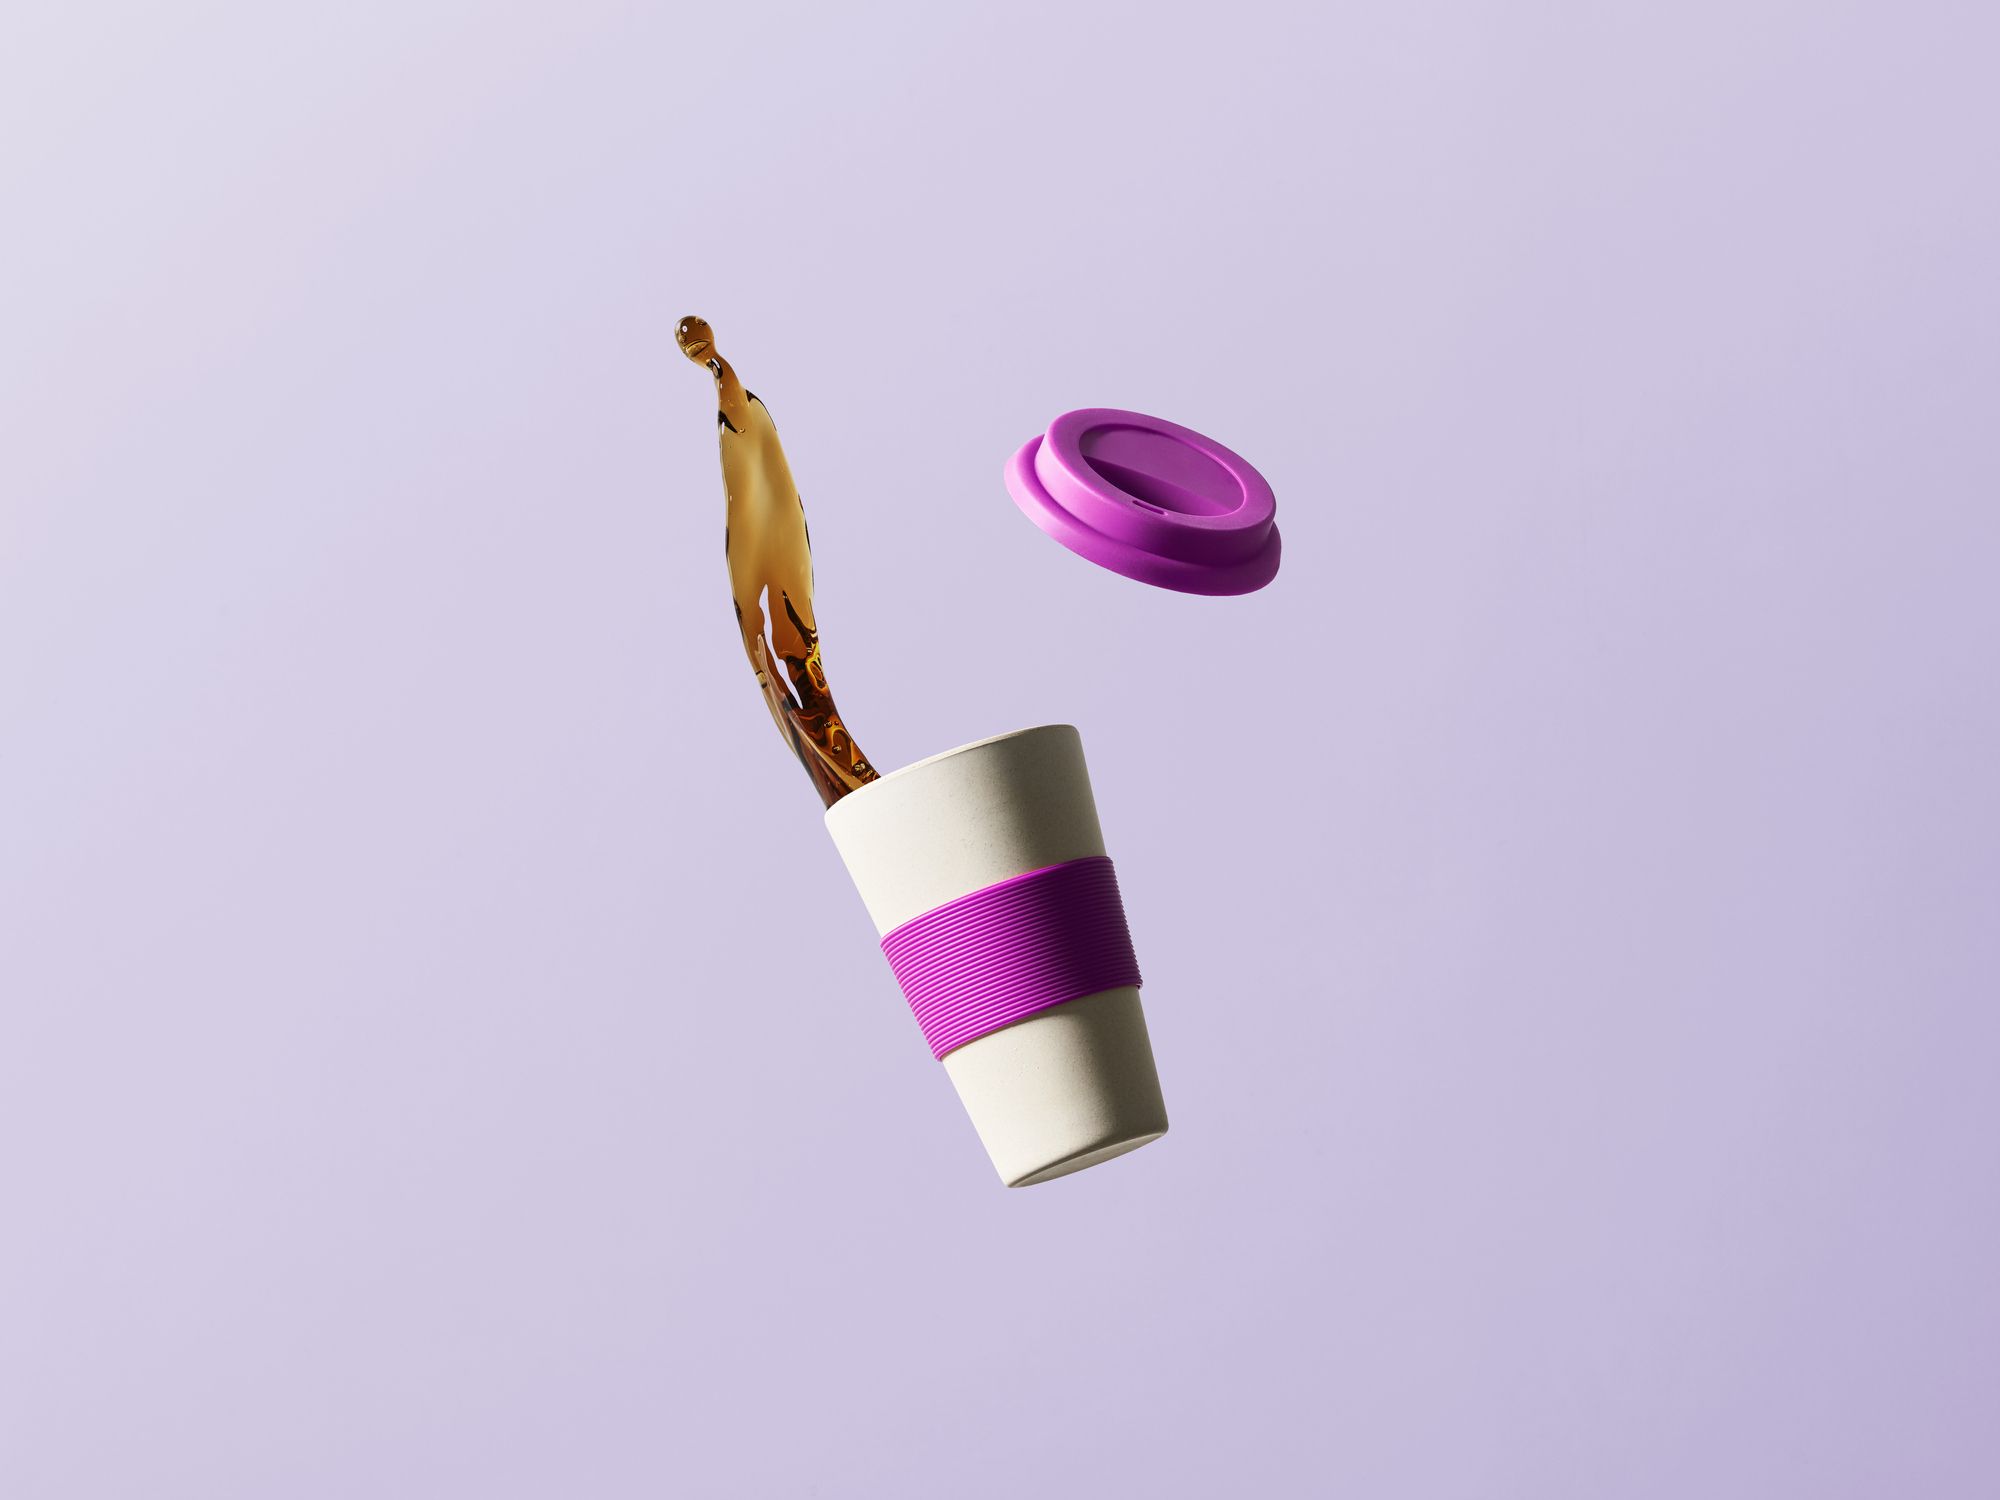 falling reusable coffee cup on a purple background